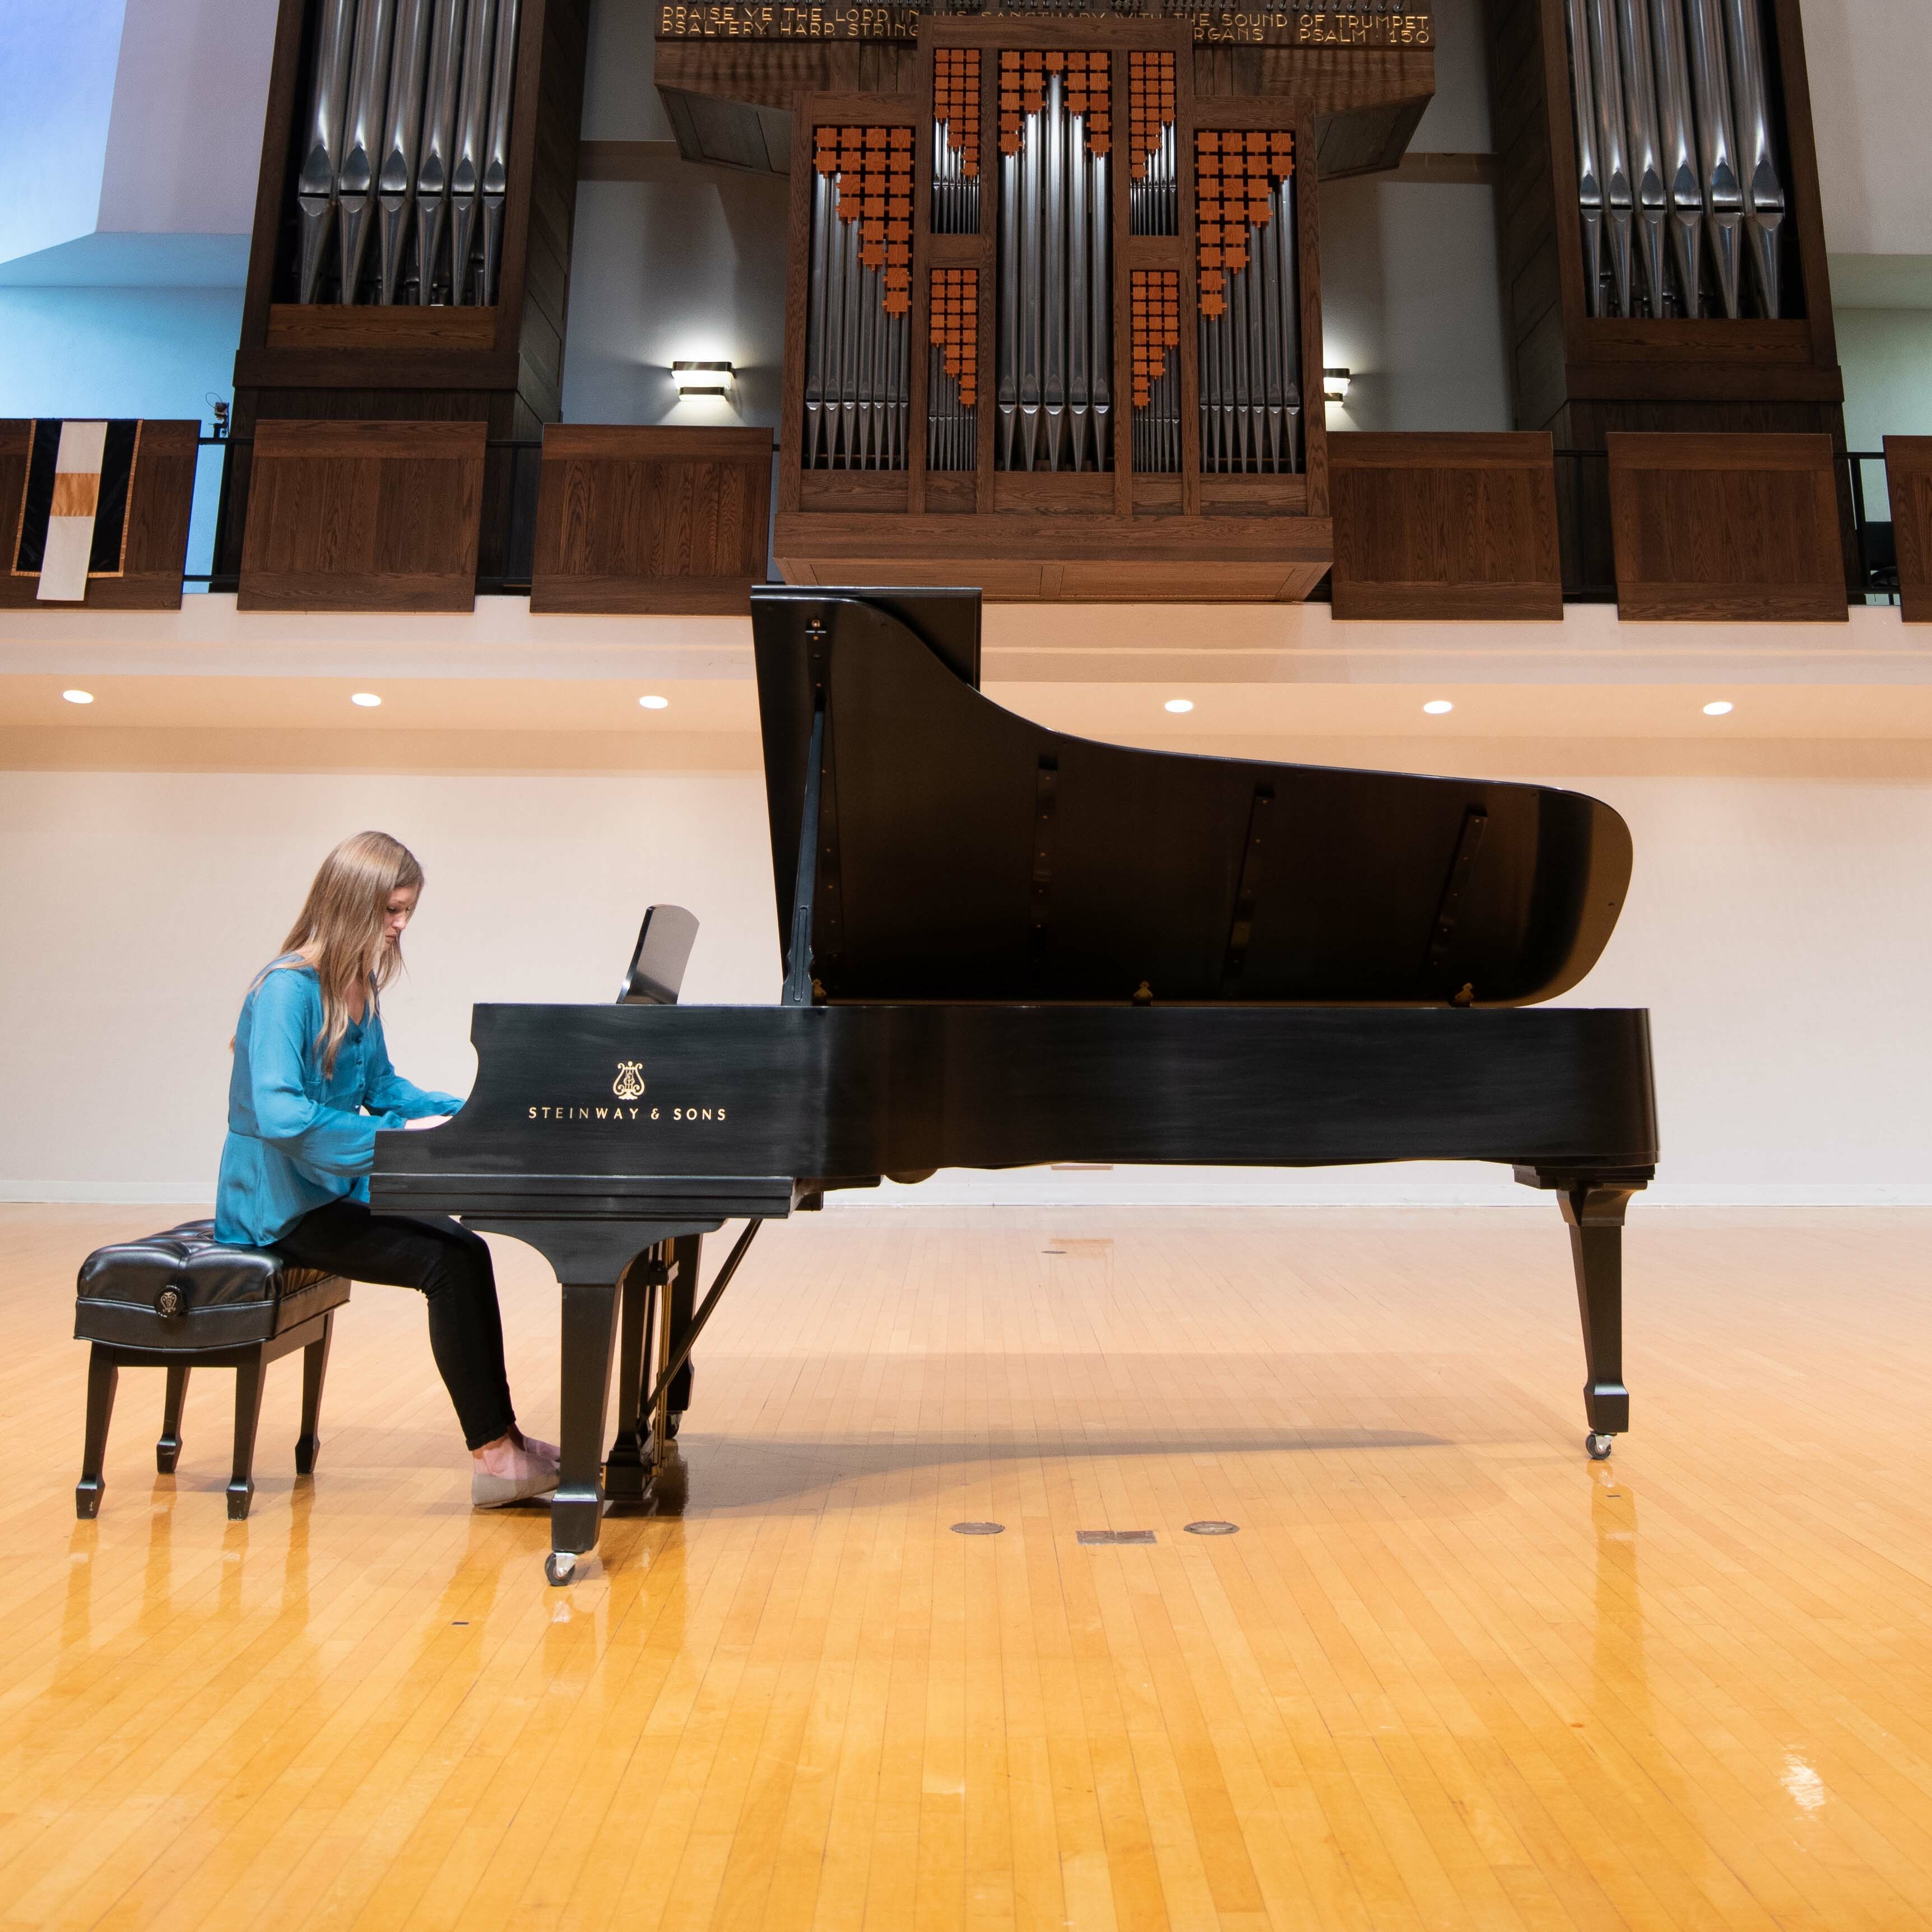 Female student plays Steinway piano on stage